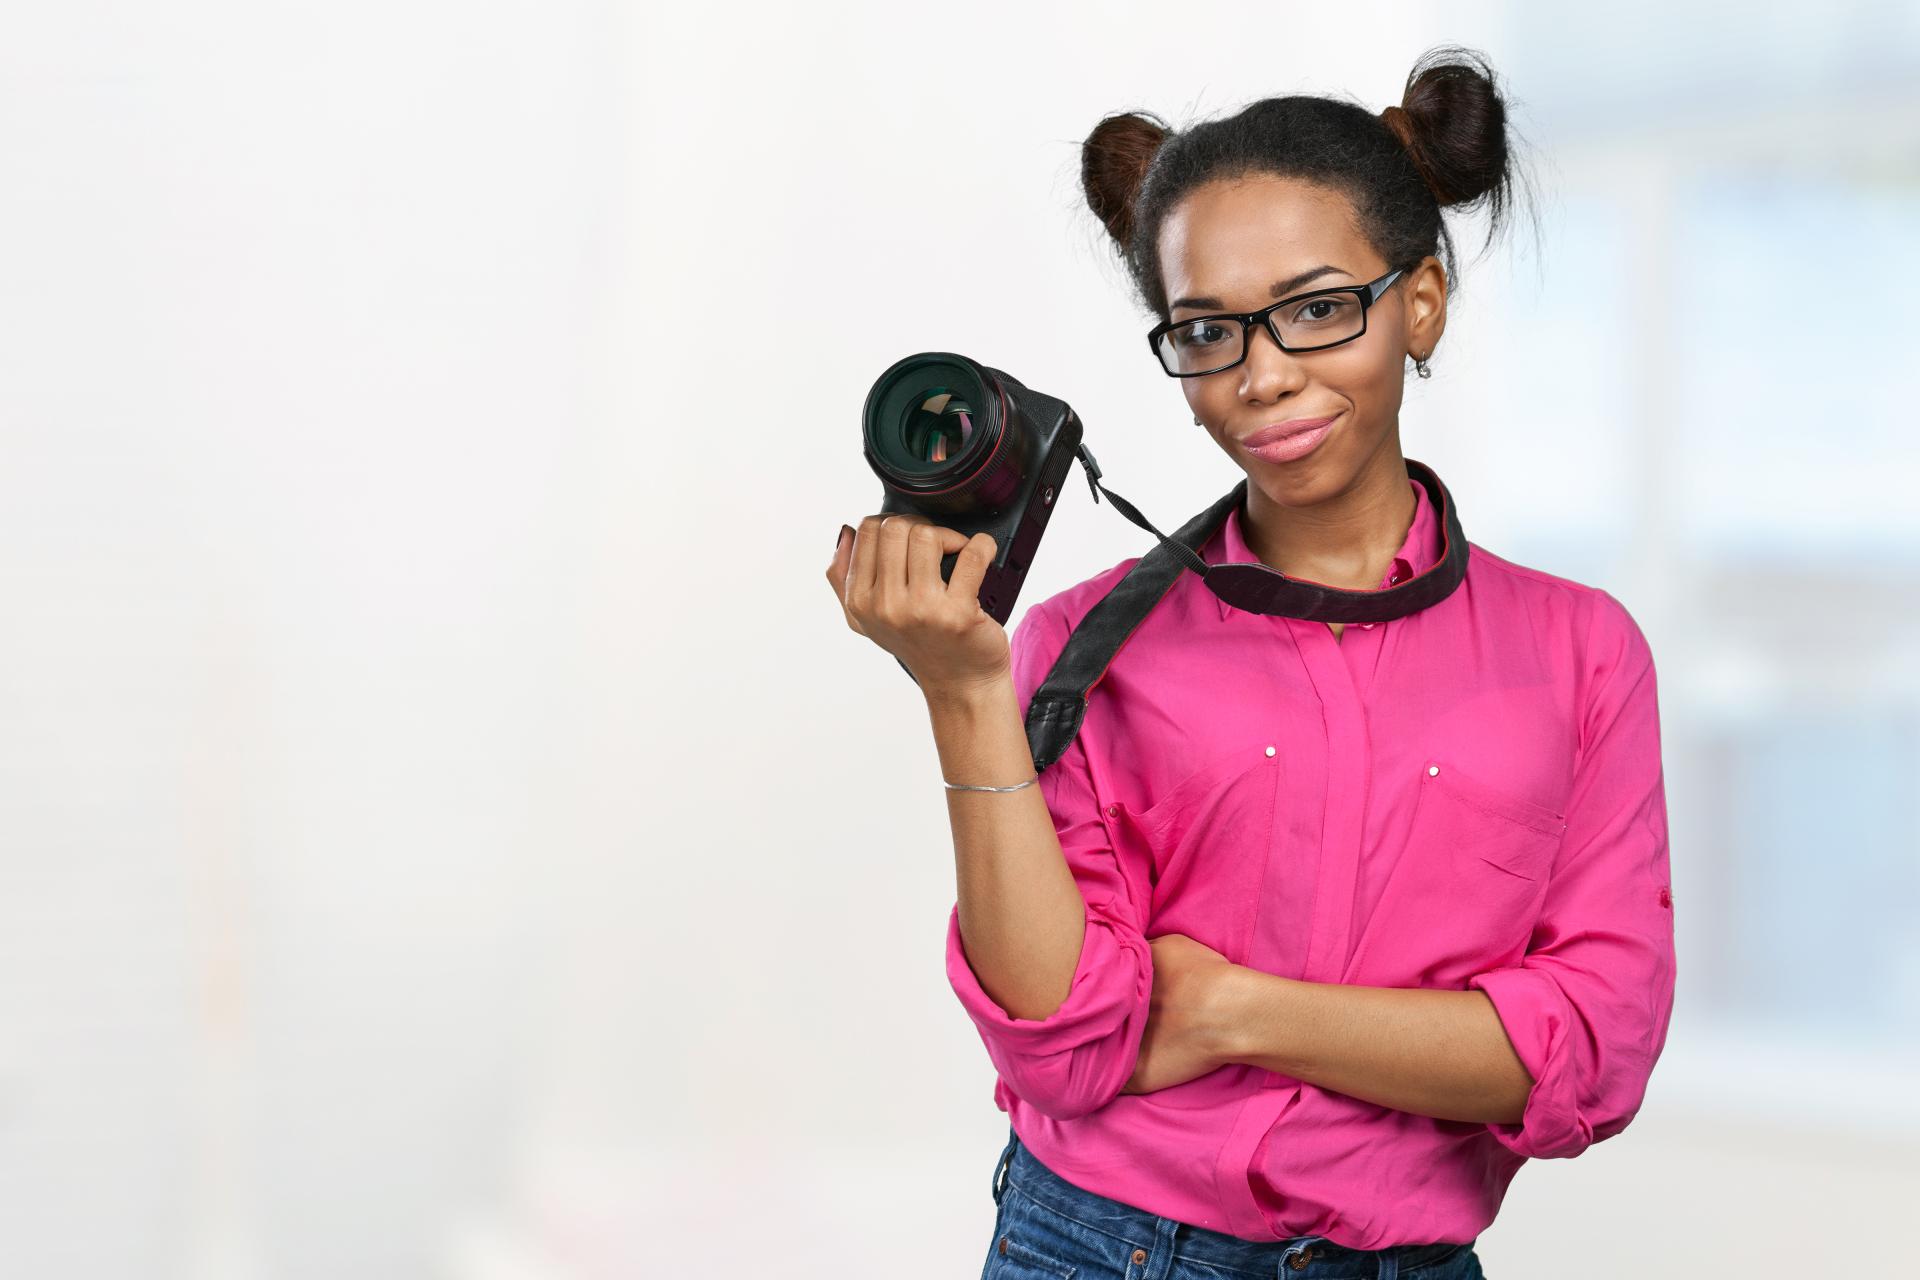 How To Make Money Online In Nigeria As A Teenager in 2023